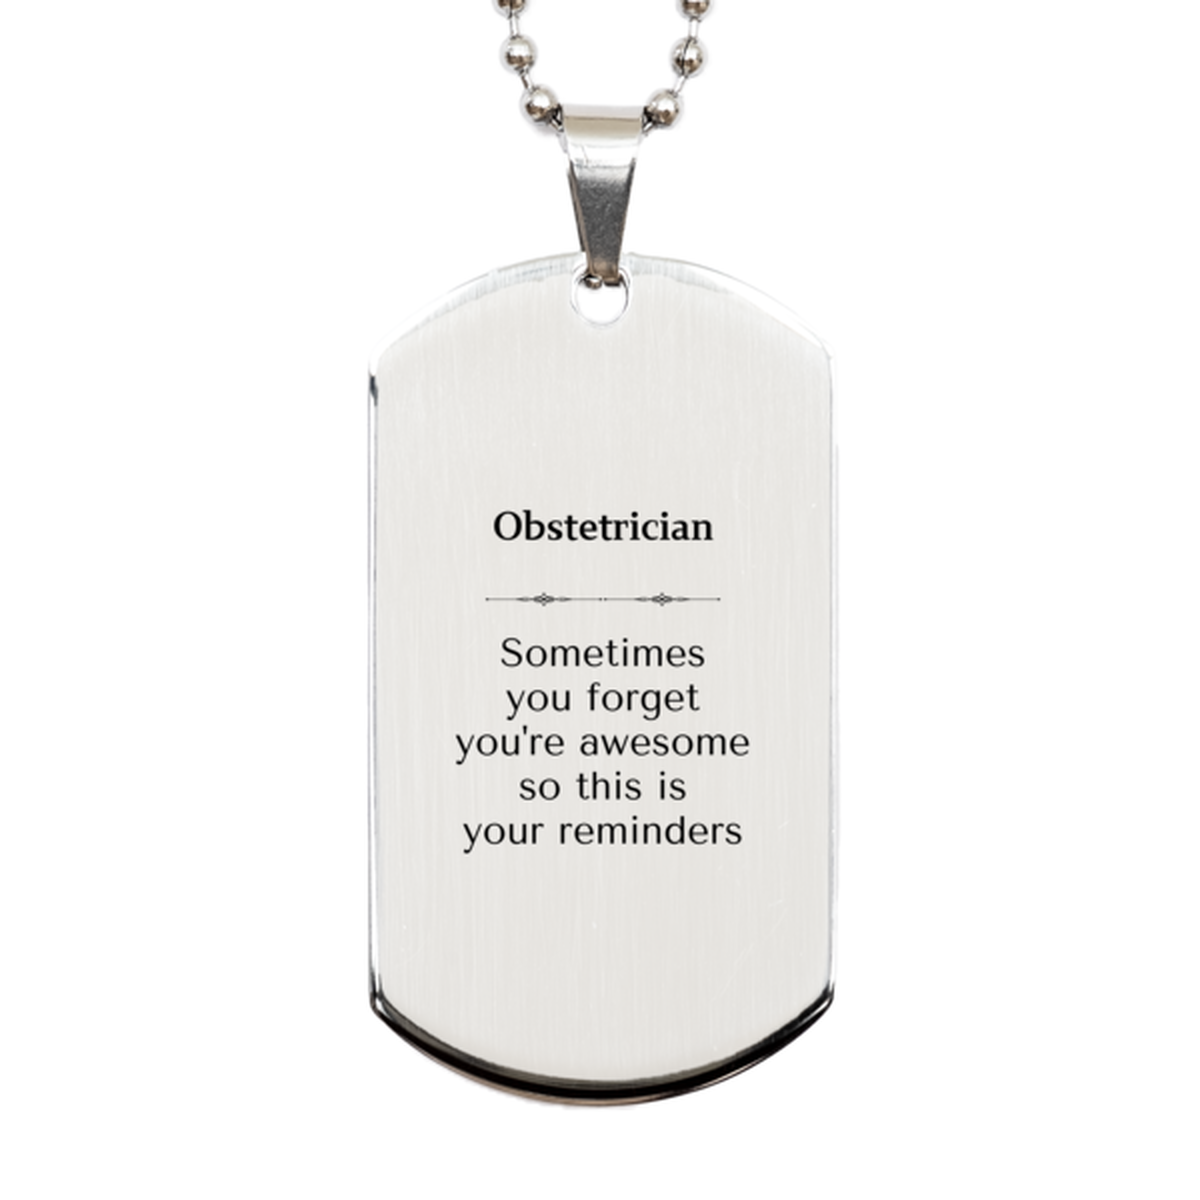 Sentimental Obstetrician Silver Dog Tag, Obstetrician Sometimes you forget you're awesome so this is your reminders, Graduation Christmas Birthday Gifts for Obstetrician, Men, Women, Coworkers